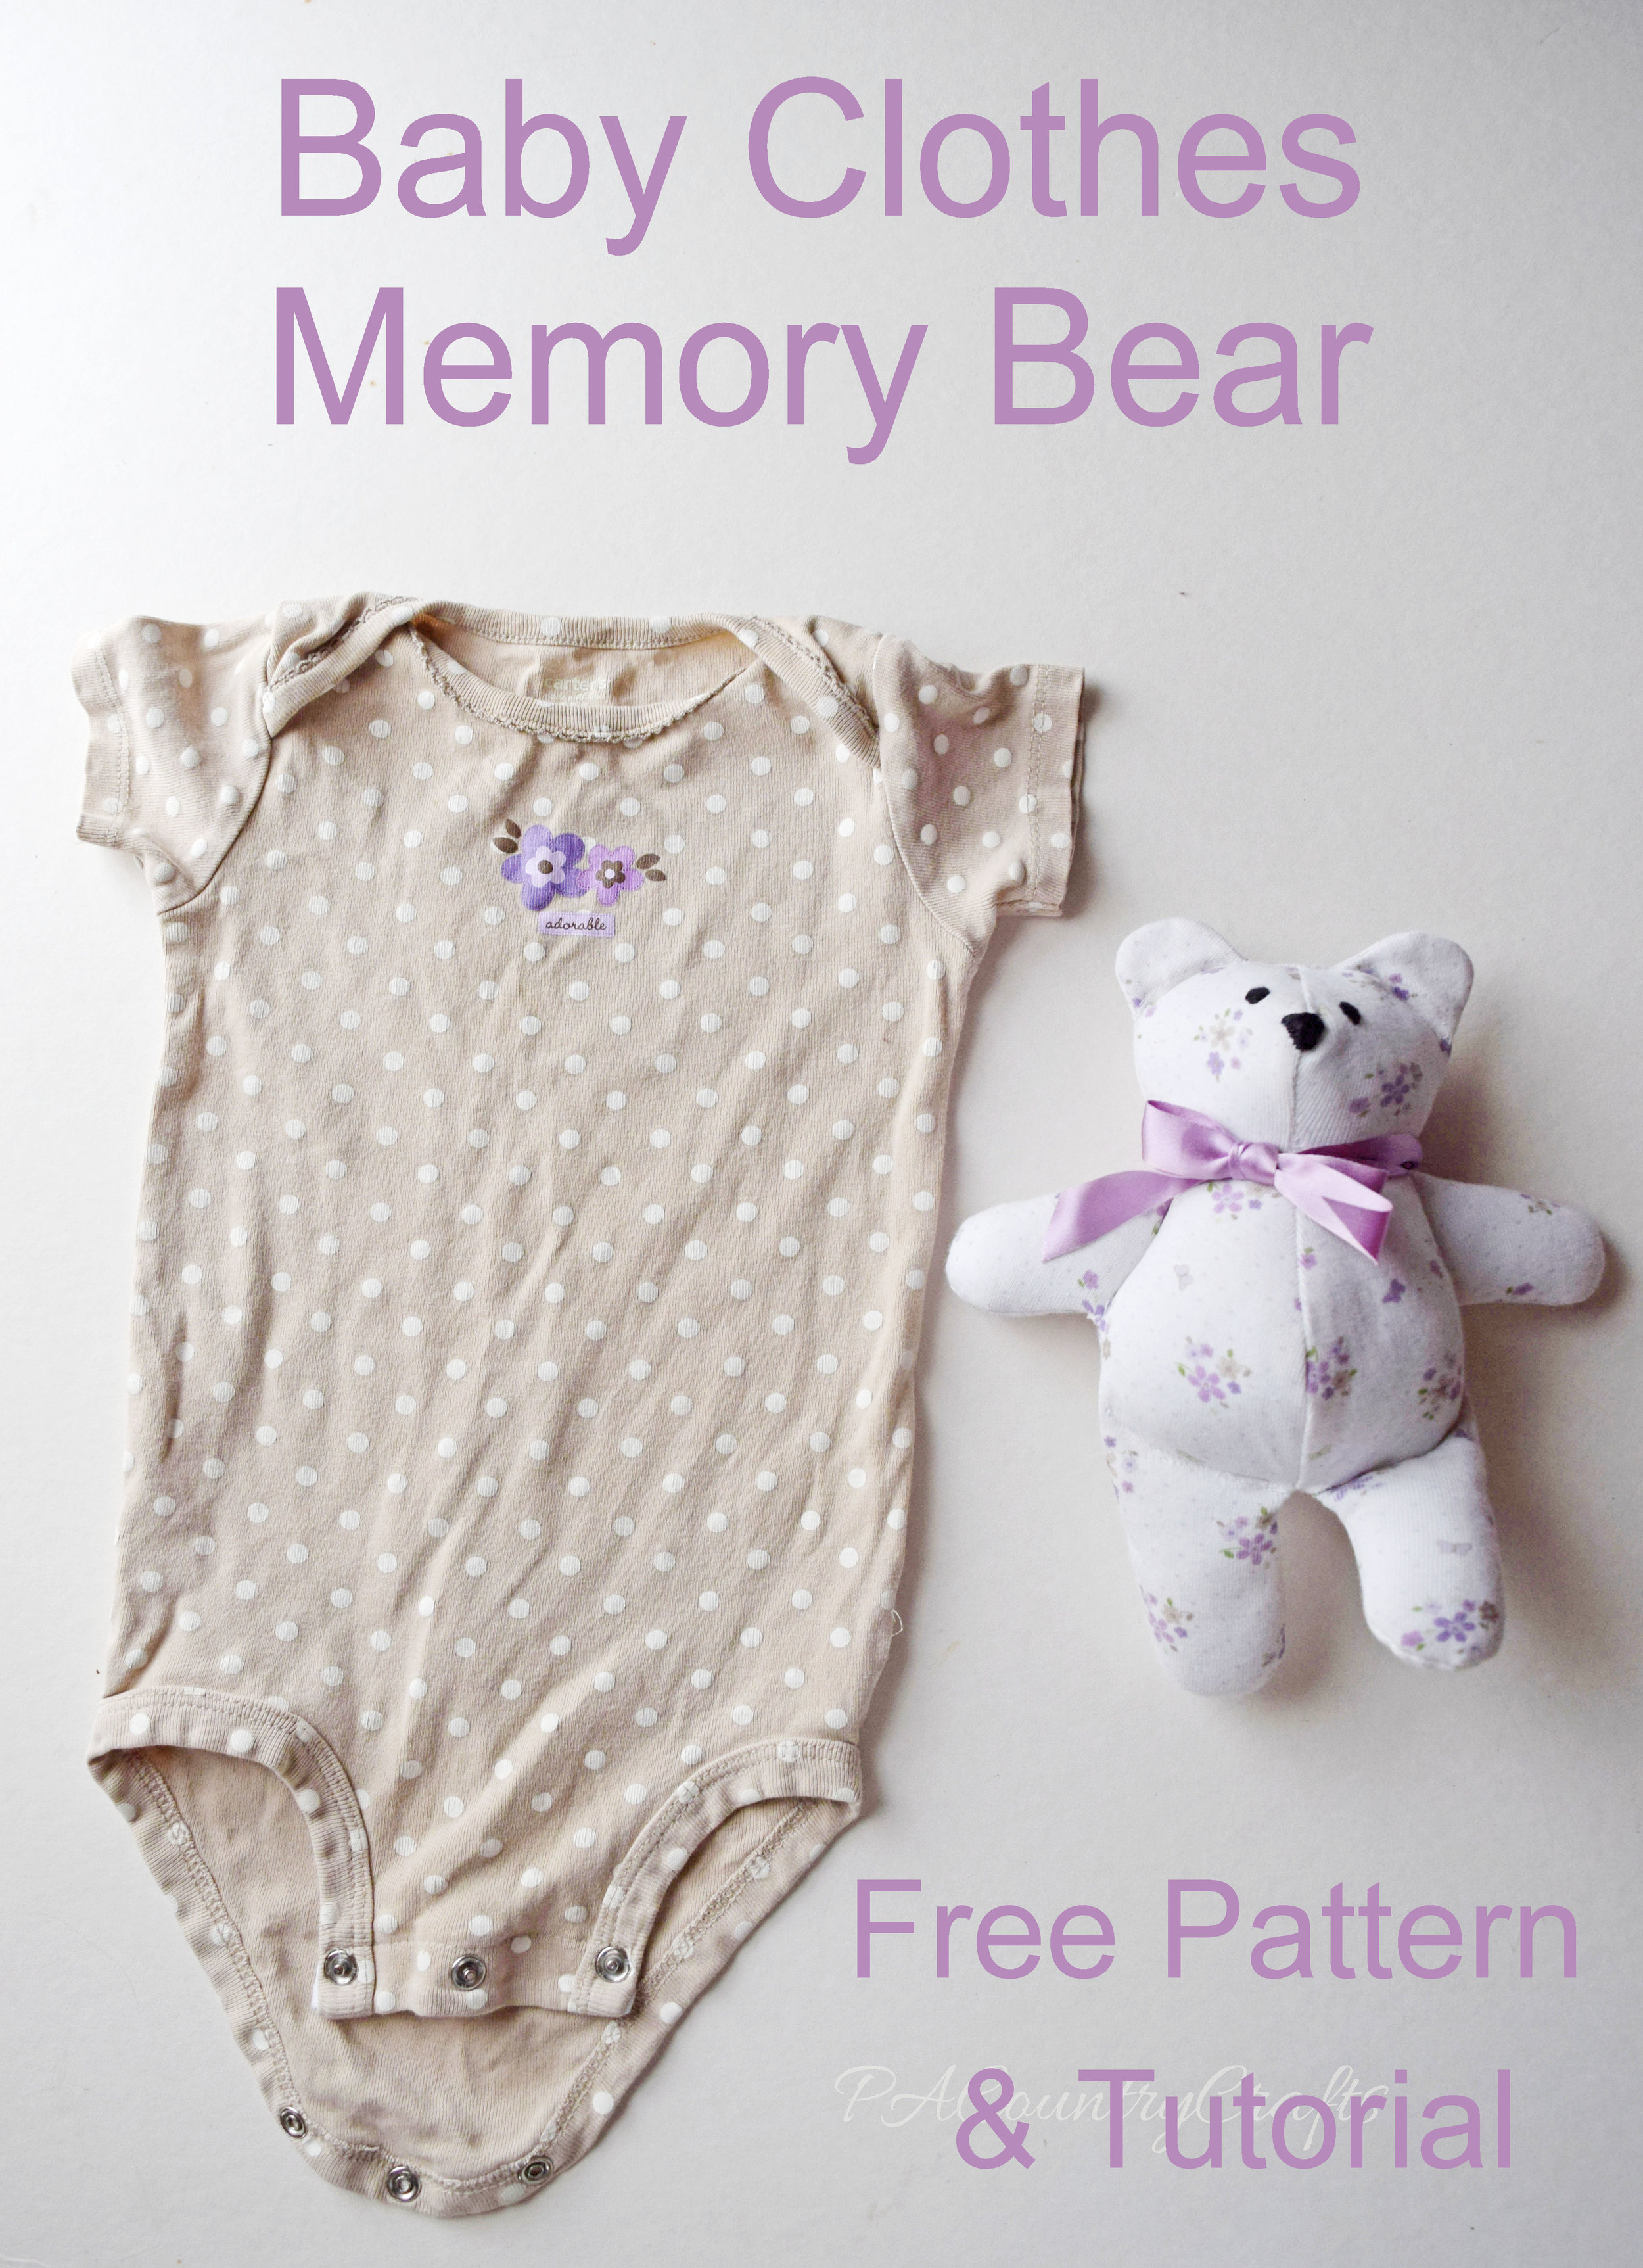 Teddy Bear Sewing Pattern And Tutorial For Beginners, Stuffe